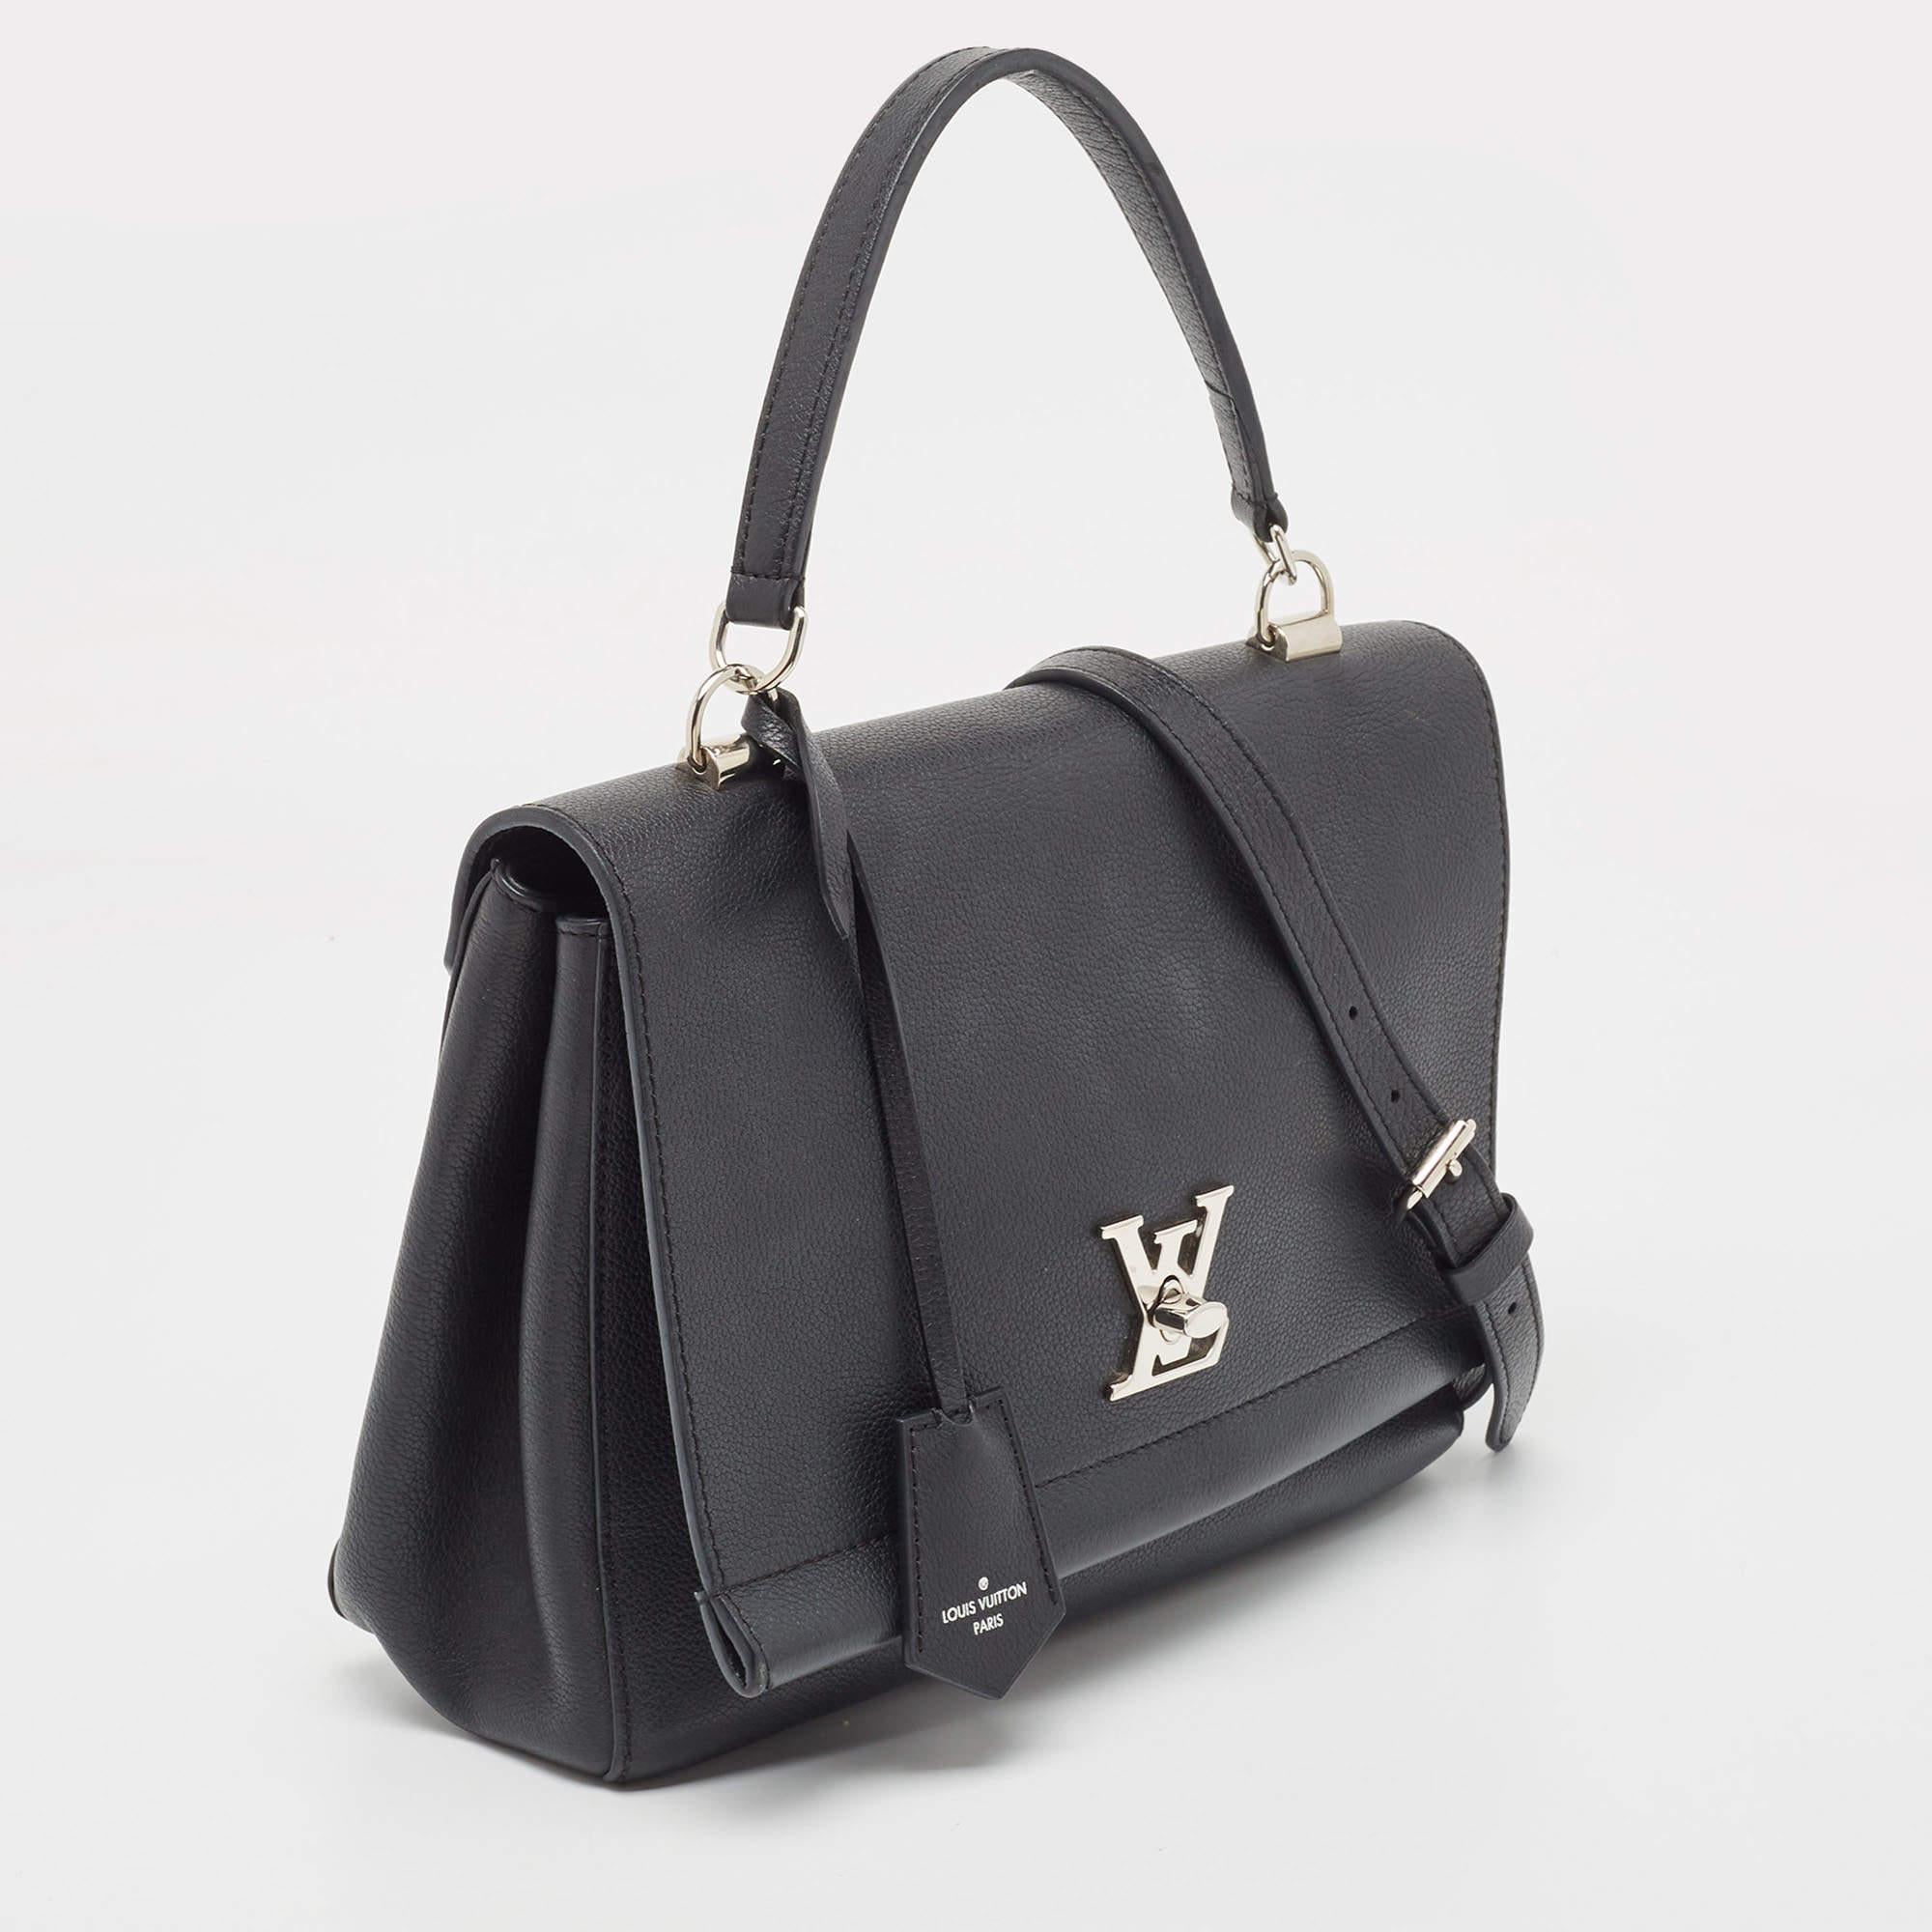 Striking a beautiful balance between essentiality and opulence, this tote from Louis Vuitton ensures that your handbag requirements are taken care of. It is equipped with practical features for all-day ease.

